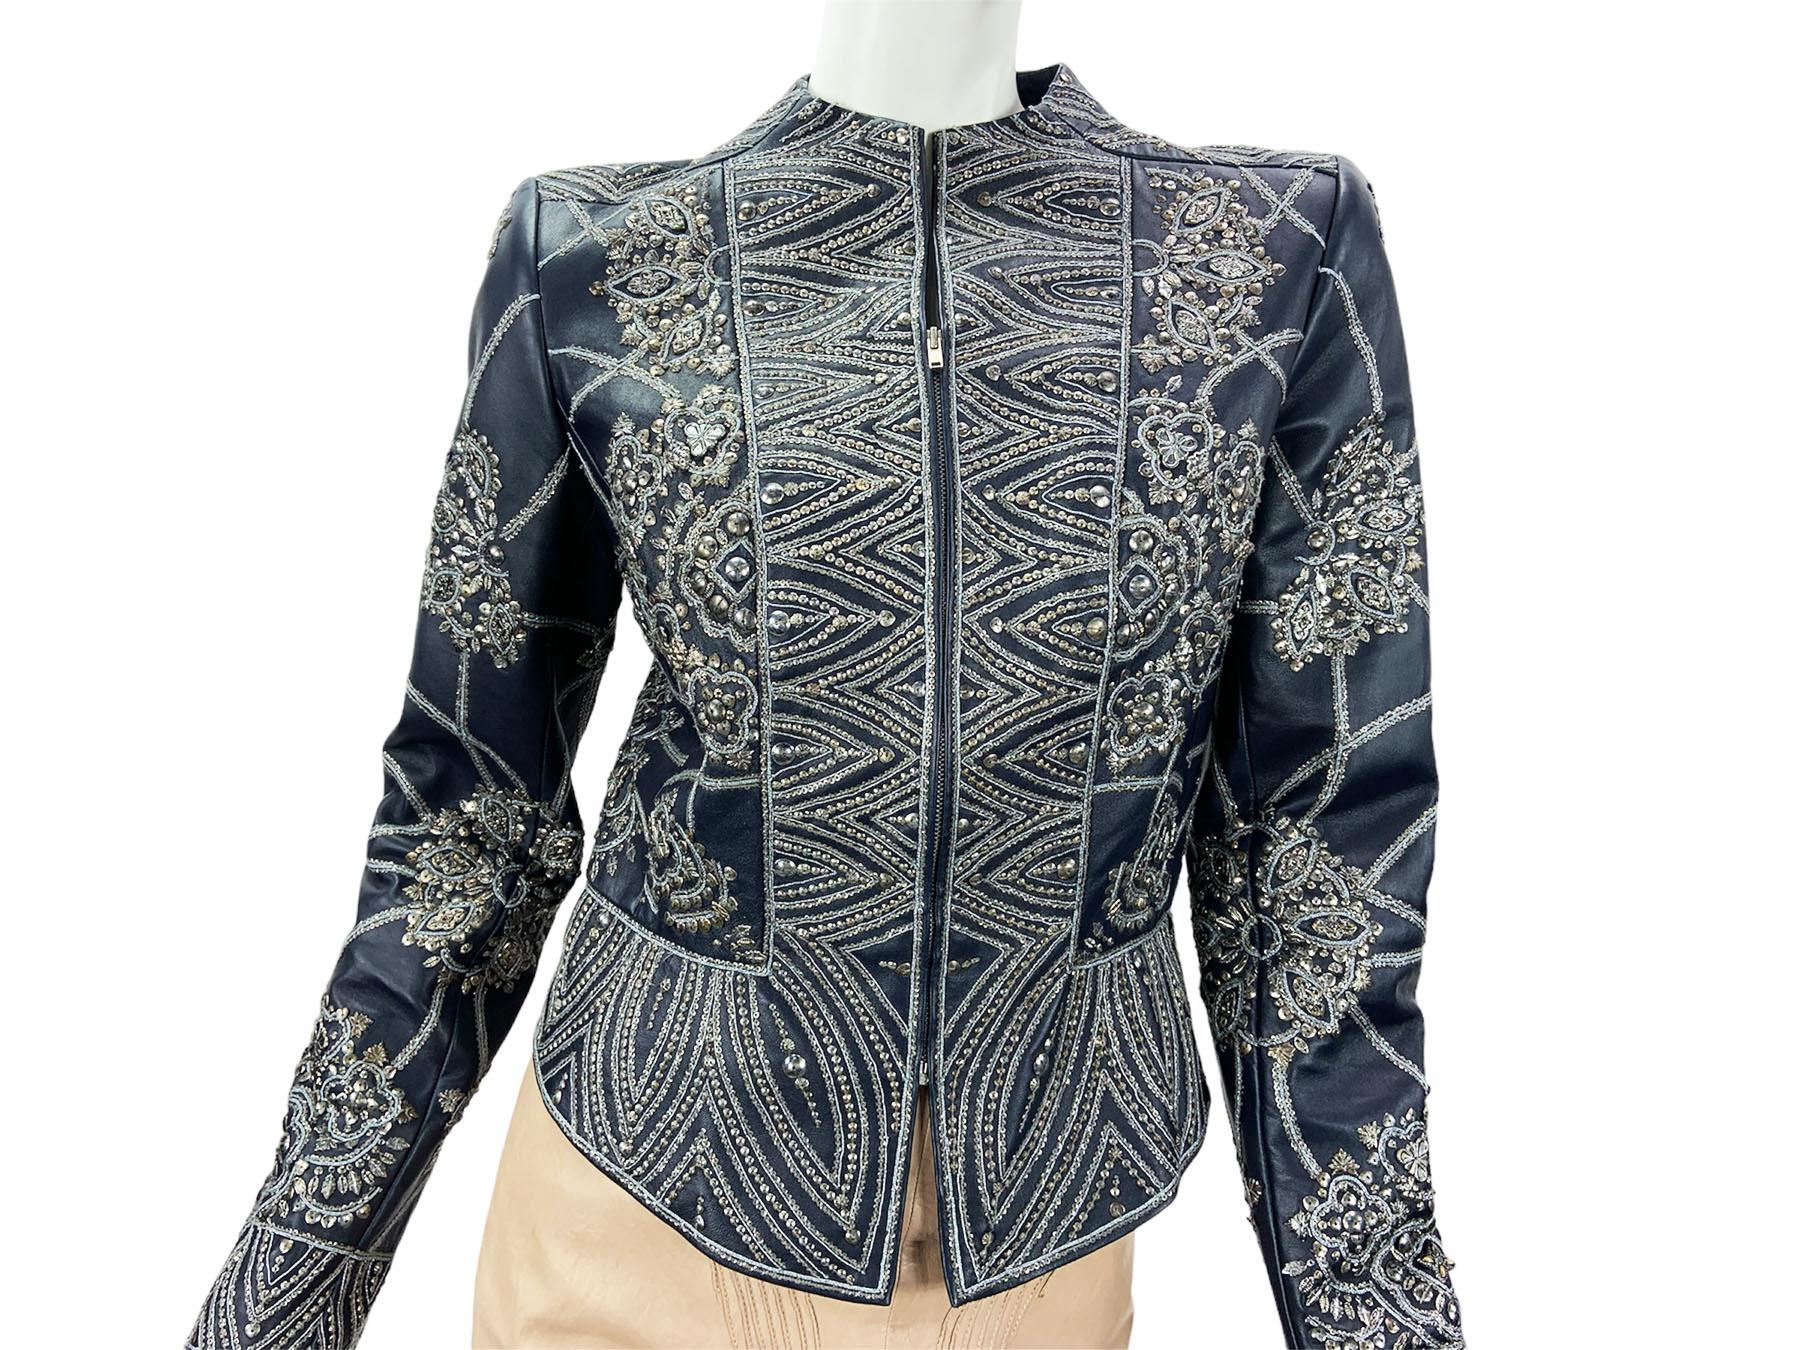 Vintage Oscar de la Renta  Blue Leather Embellished Jacket 
F/W 2006 Collection
US size - 6
Lamb Leather, Exclusive Embroidery in Silver Tone Metal Ornamental Decoration.
Peplum Style, Zip Closure, Fully Lined.
Measurements: Length - 22 inches front